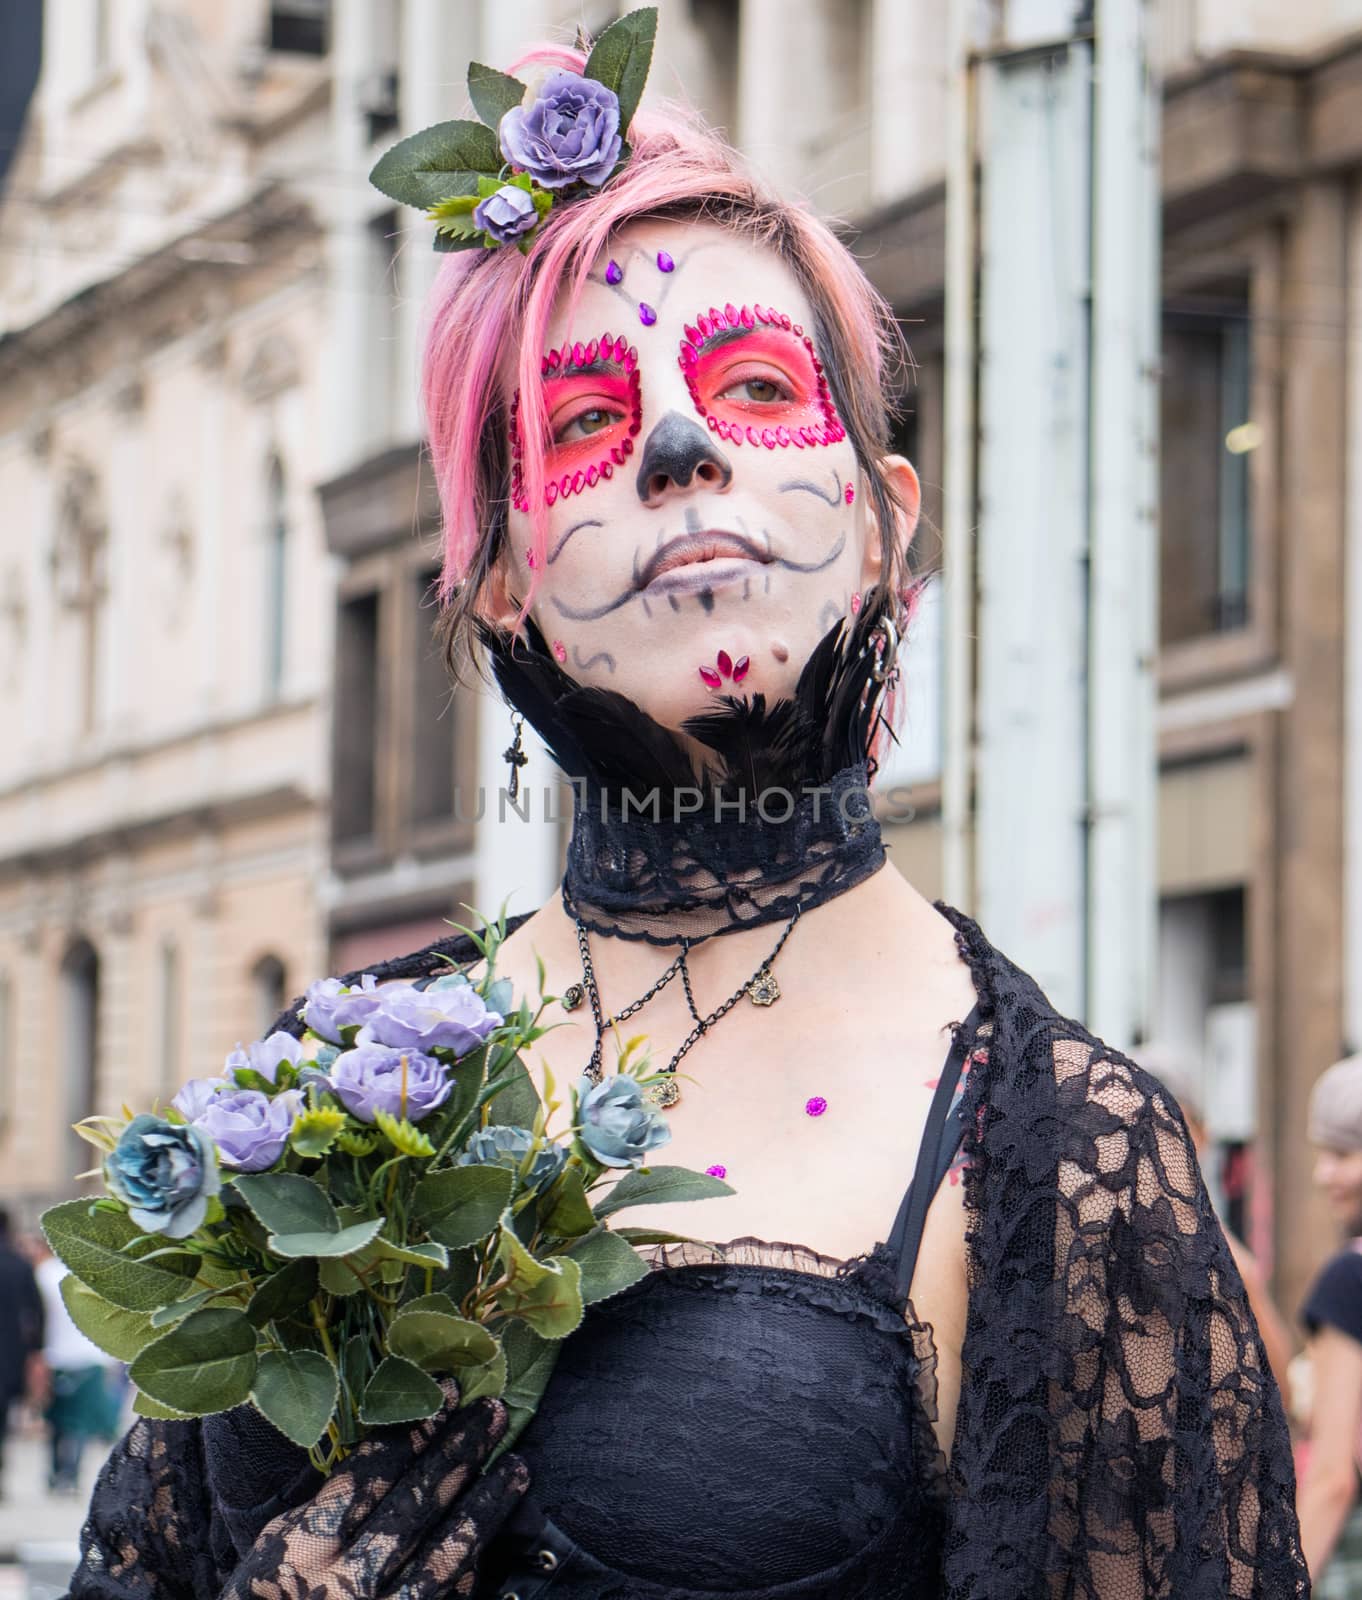 Woman in costumes in Zombie Walk Sao Paulo by marphotography